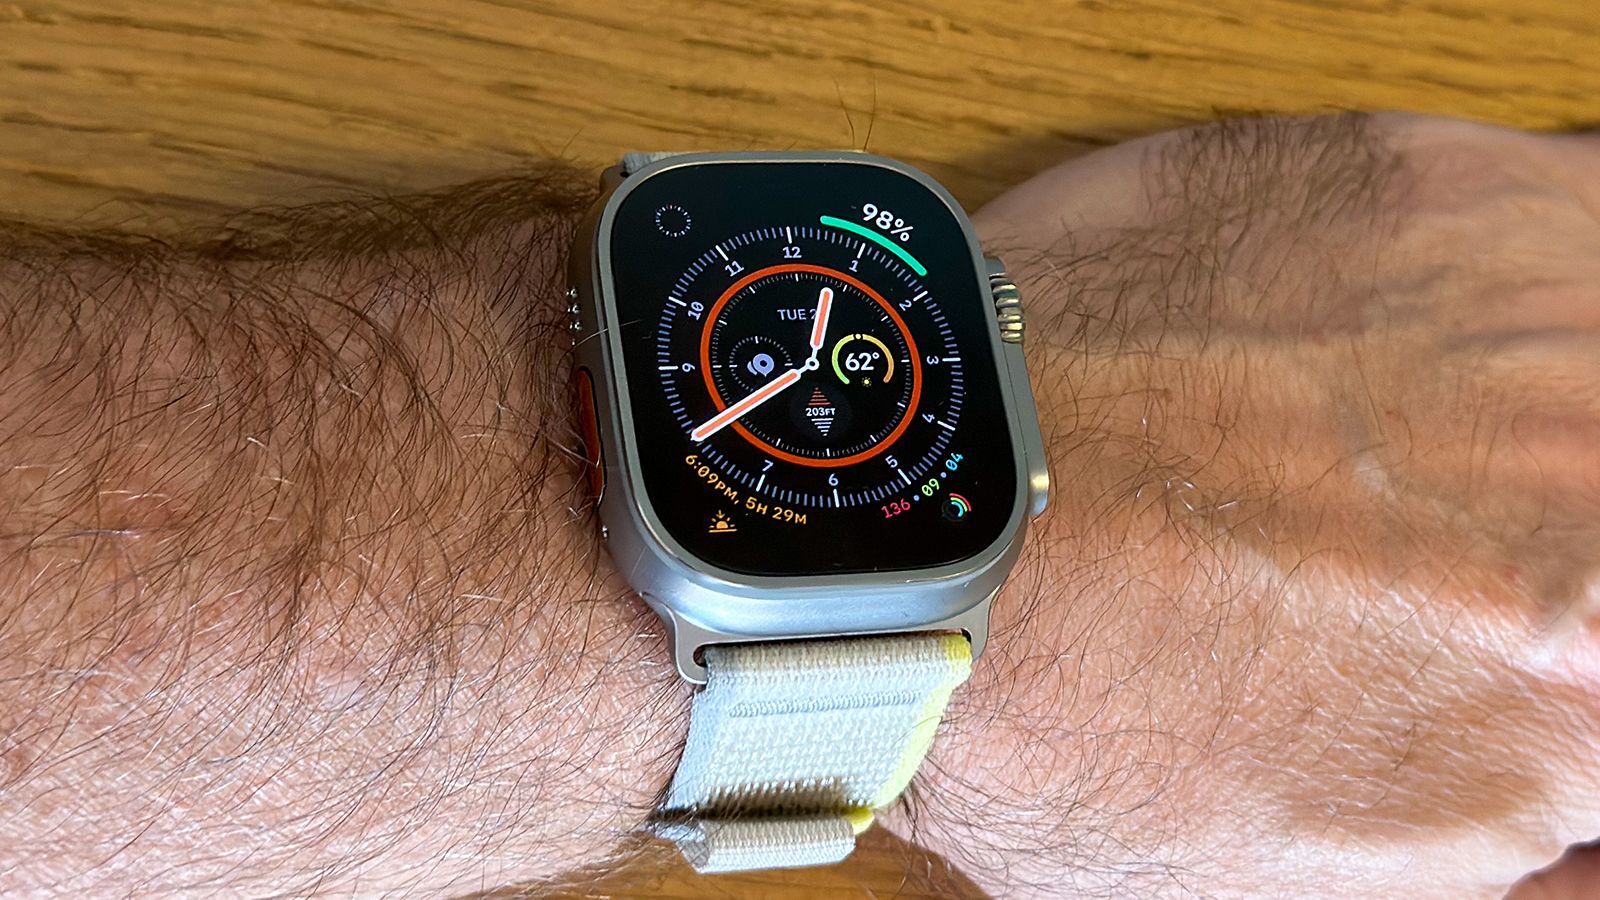 Apple Watch Series 4 Or Samsung Galaxy Watch: The Ultimate Face-Off